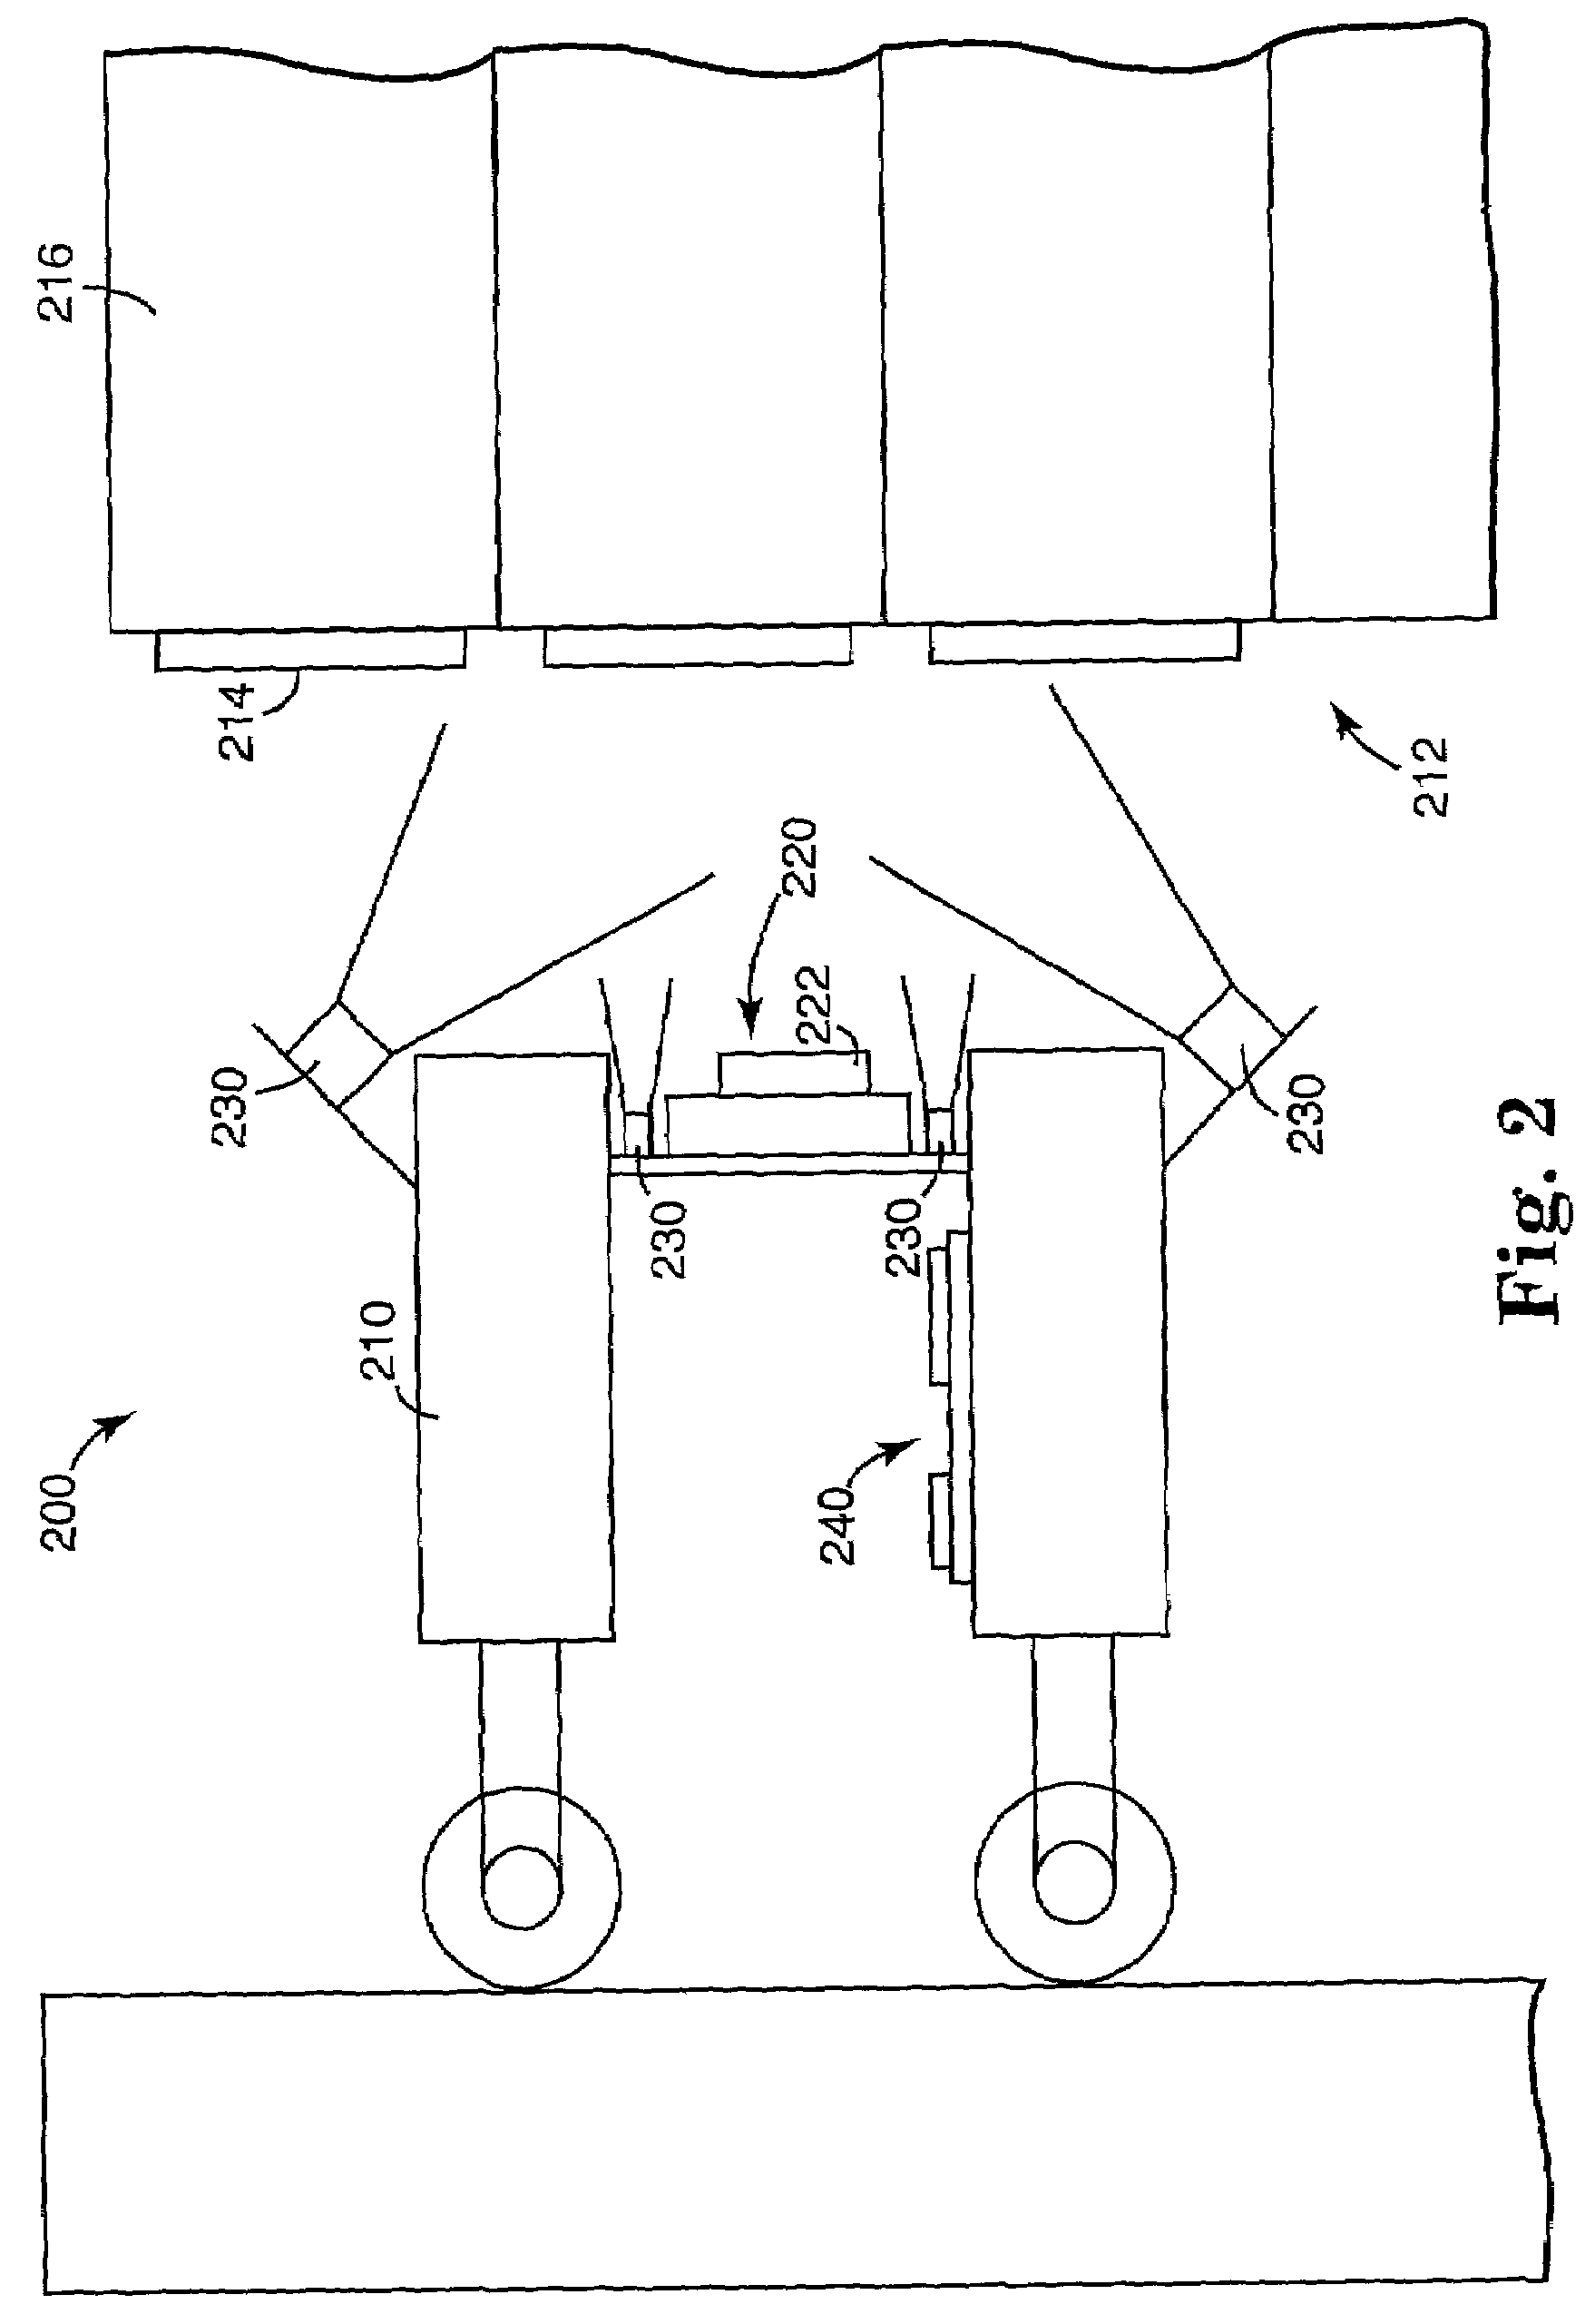 Method and apparatus using dual bounding boxes as dynamic templates for cartridge rack identification and tracking